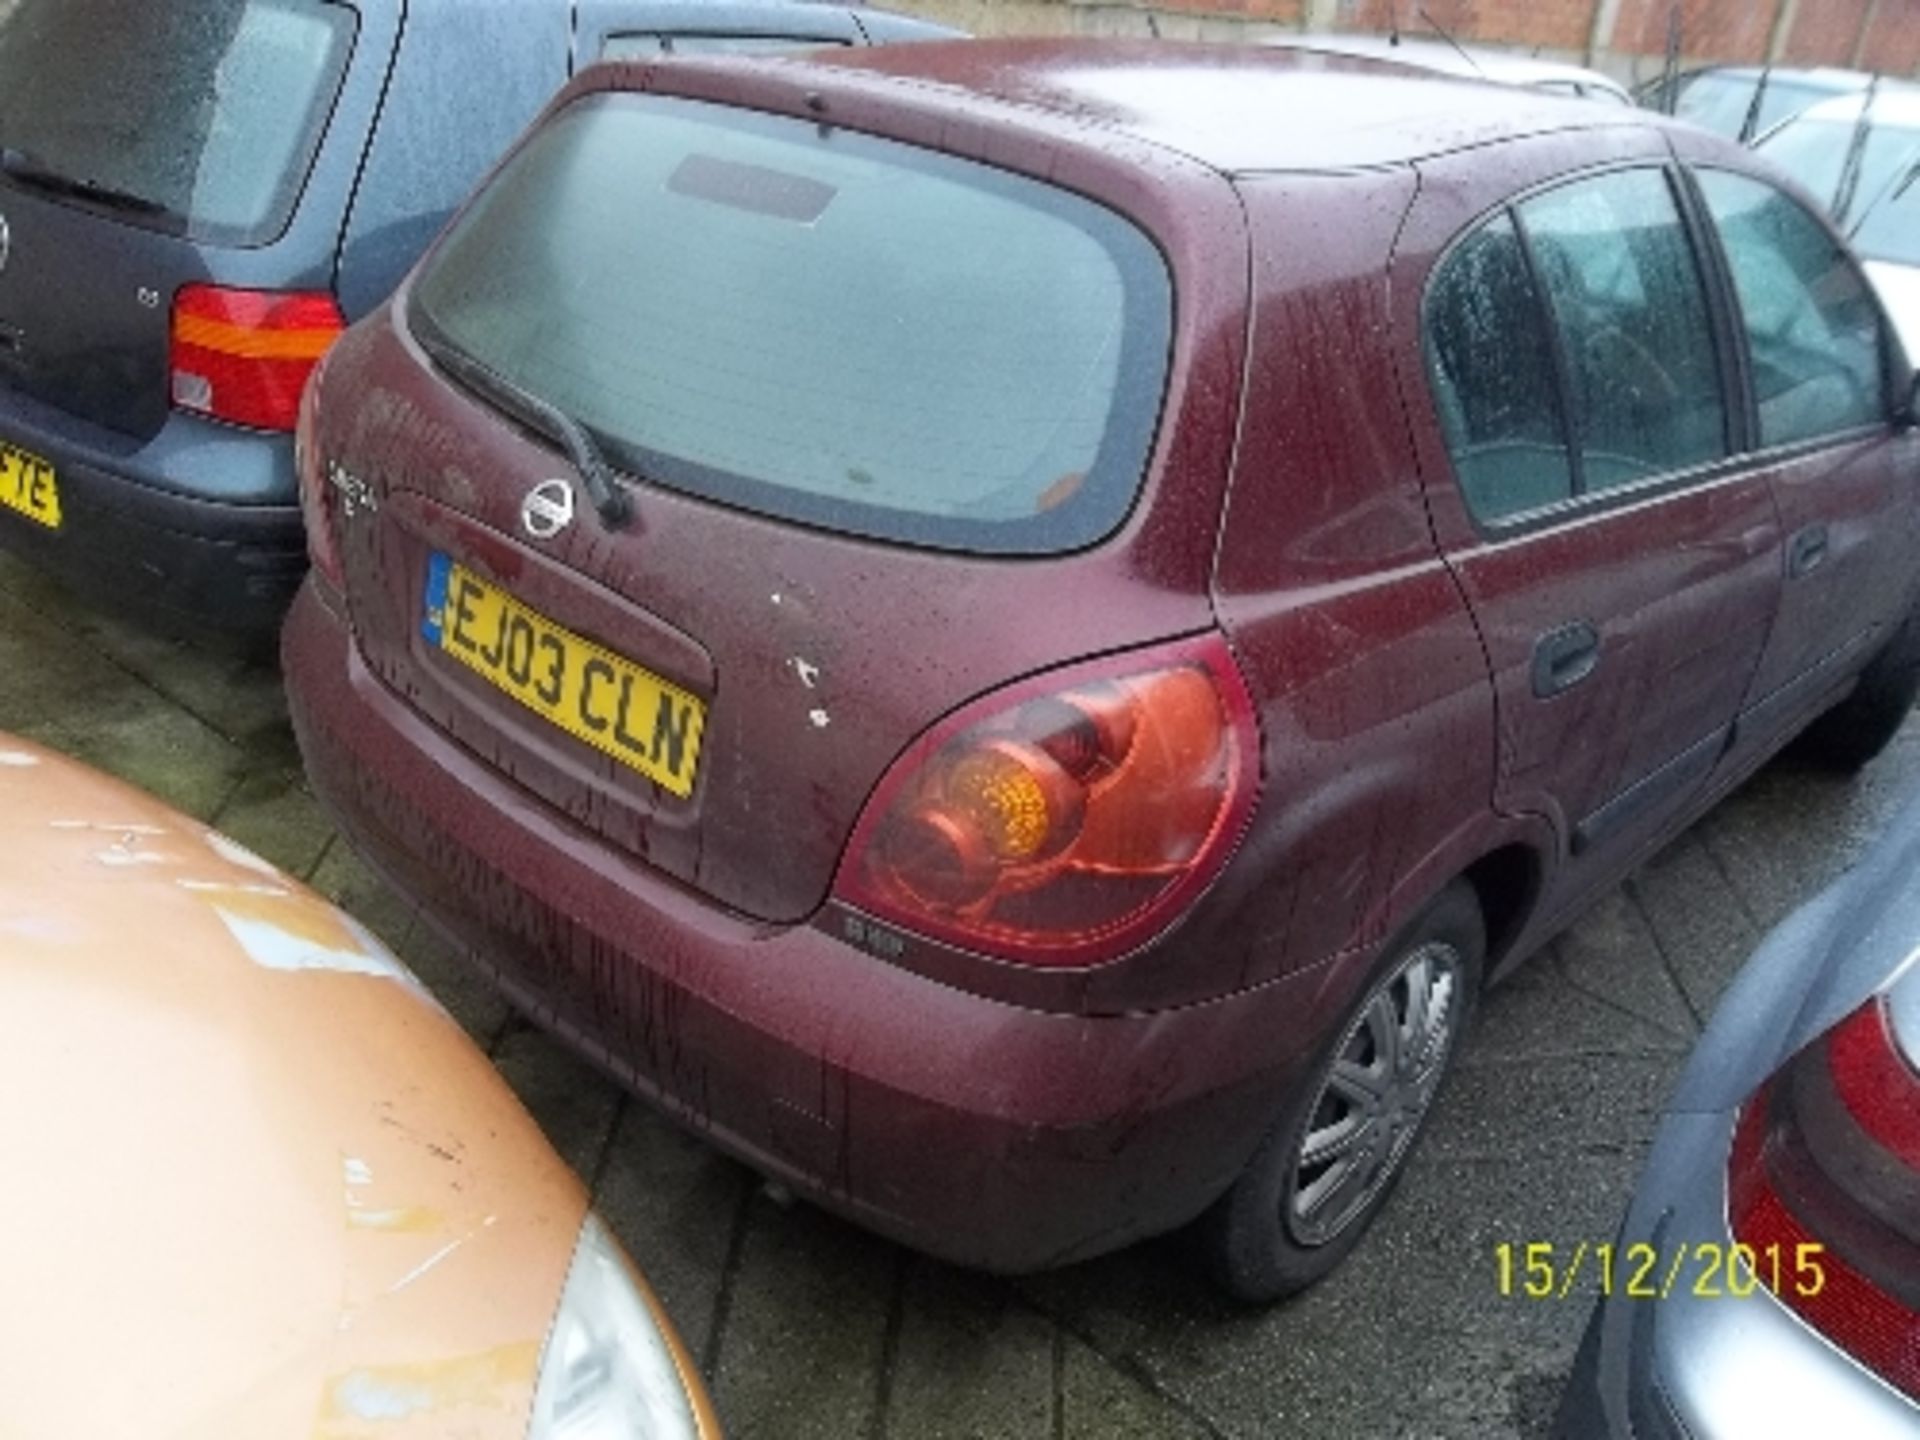 Nissan Almera S - EJ03 CLN  Date of registration:  22.04.2003 1769cc, petrol, automatic, red - Image 3 of 4